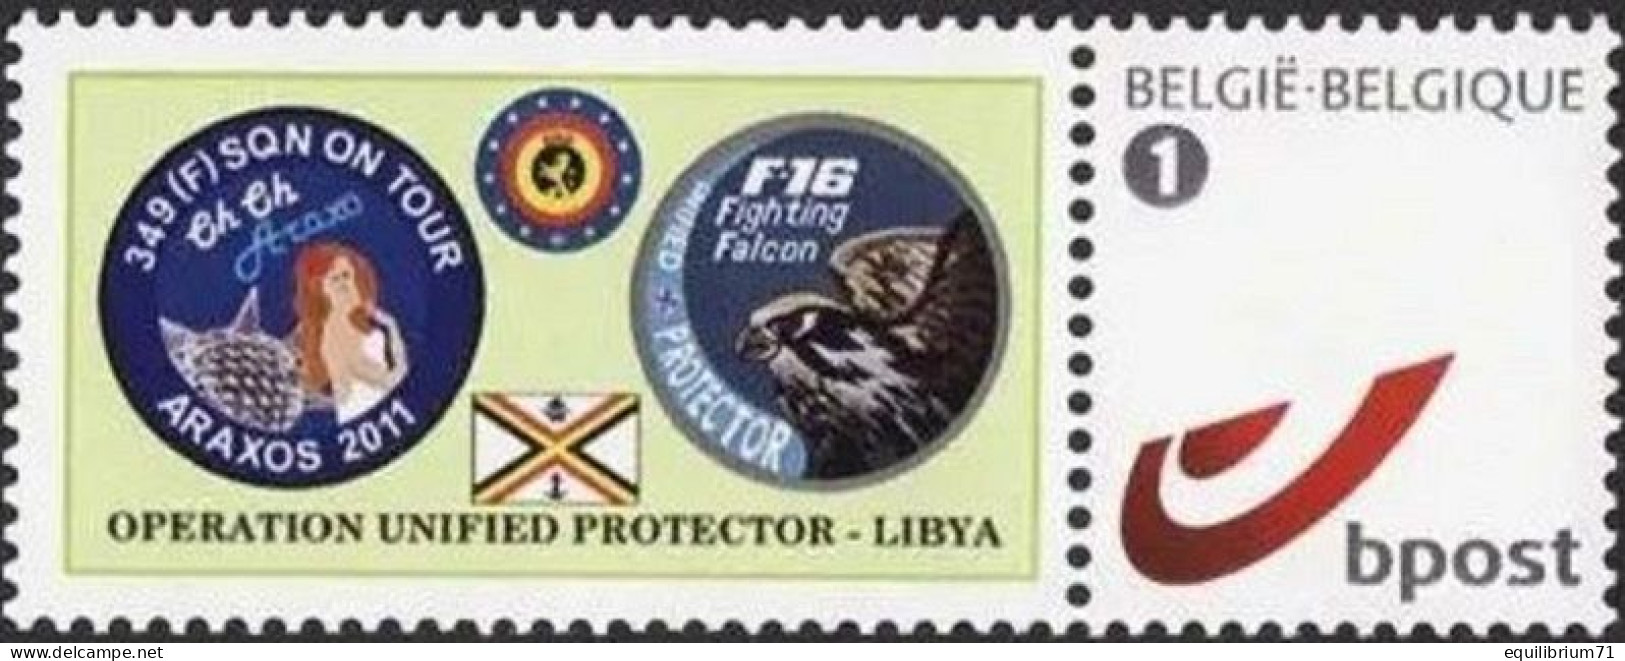 DUOSTAMP** / MYSTAMP** - Operation Unified Protector - NATO And Libya - Mint